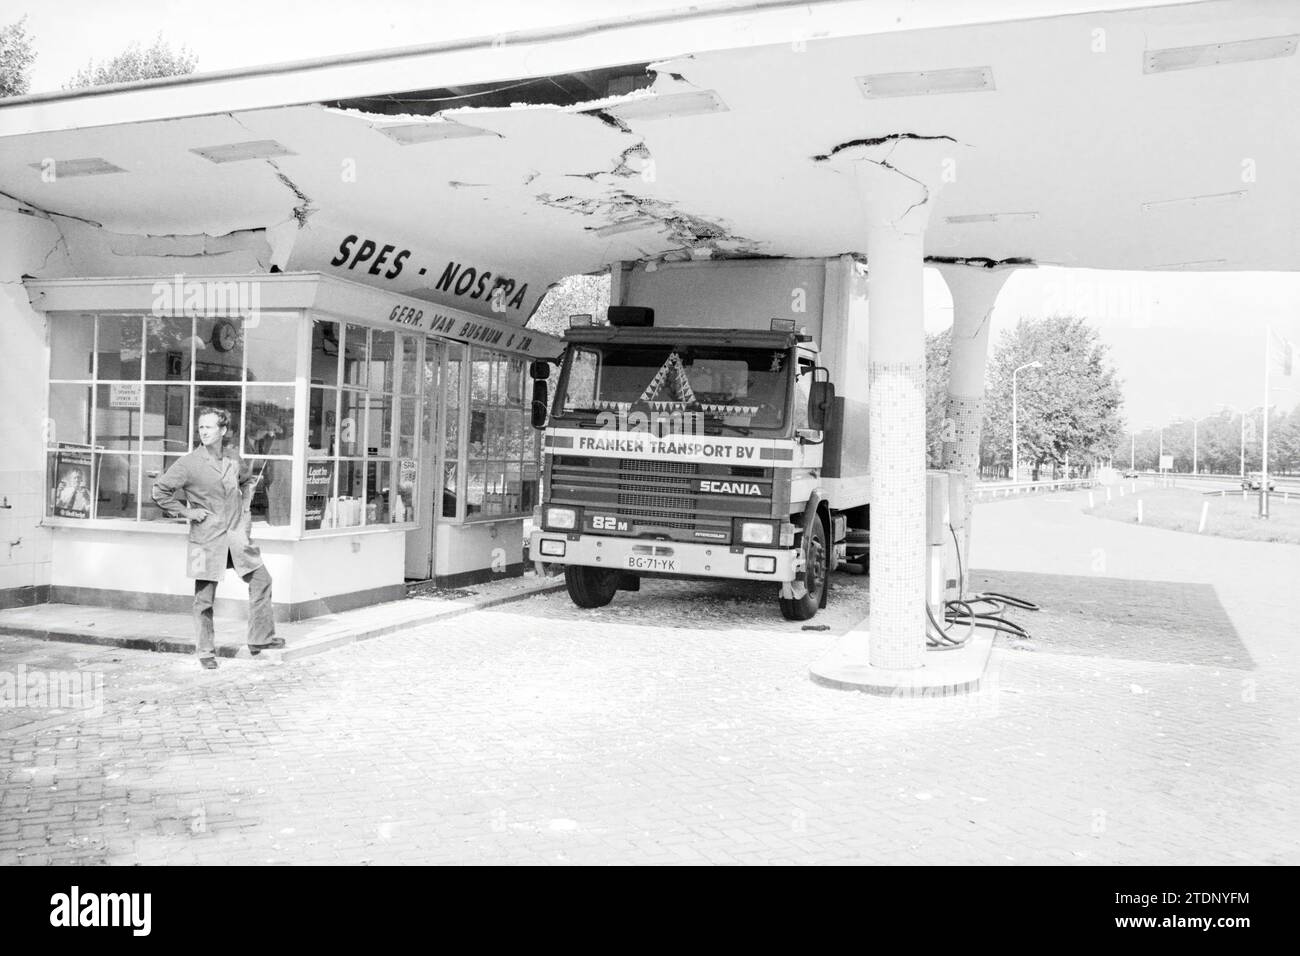 Truck destroys gas station, 00-09-1983, Whizgle News from the Past, Tailored for the Future. Explore historical narratives, Dutch The Netherlands agency image with a modern perspective, bridging the gap between yesterday's events and tomorrow's insights. A timeless journey shaping the stories that shape our future Stock Photo